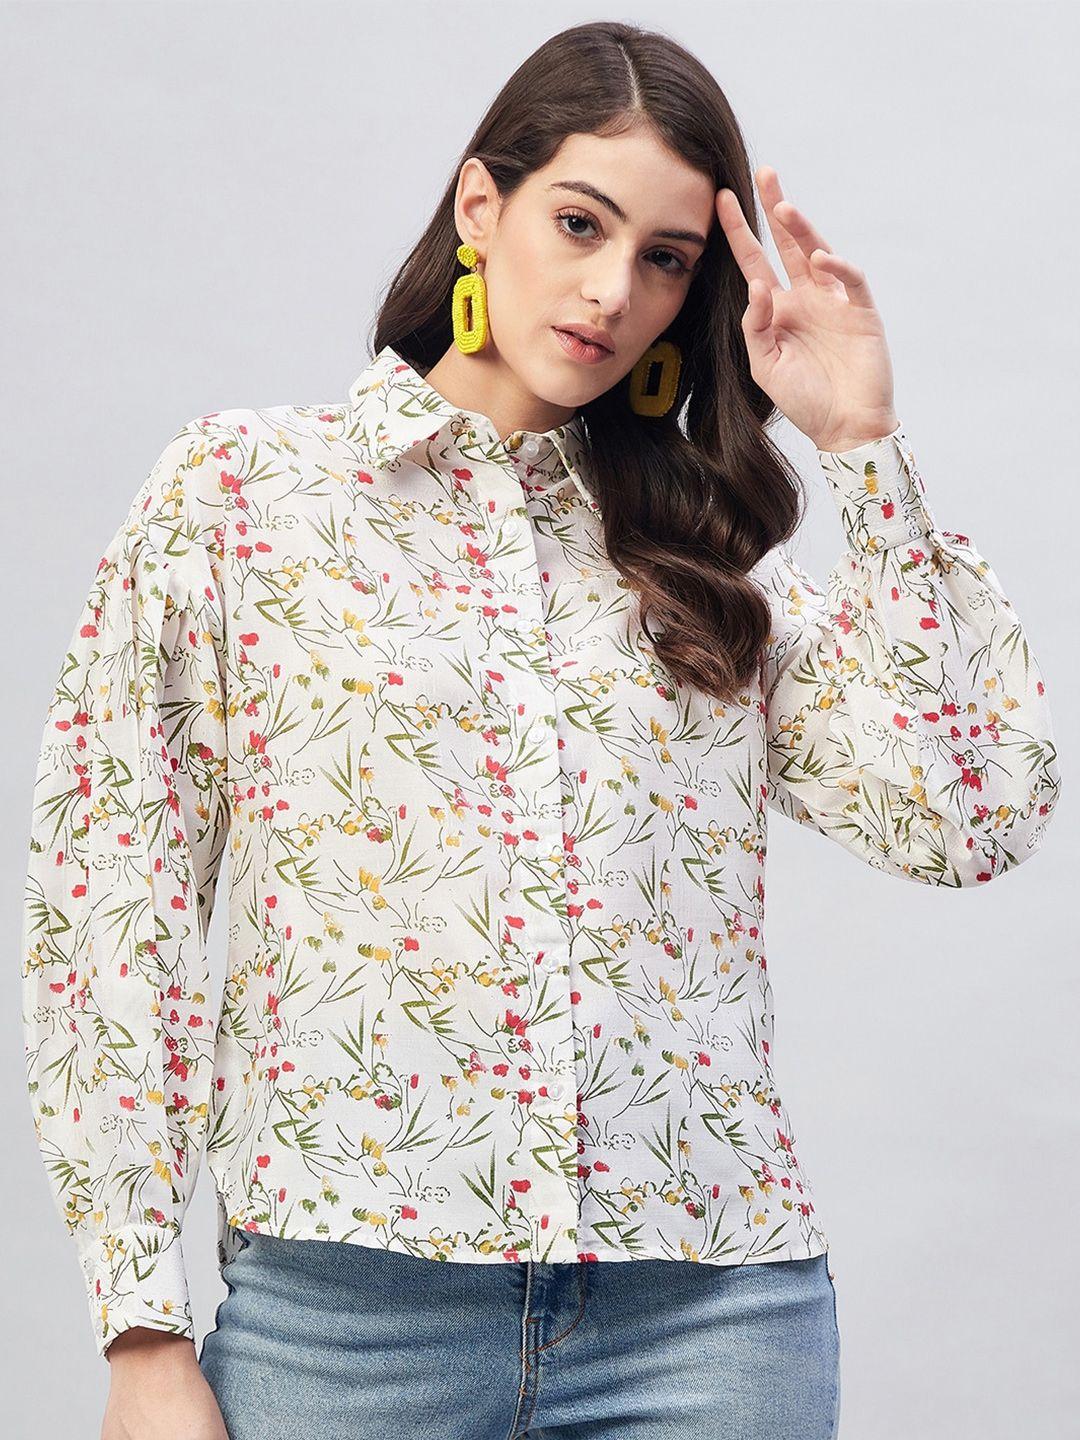 marie-claire-women-floral-printed-casual-shirt